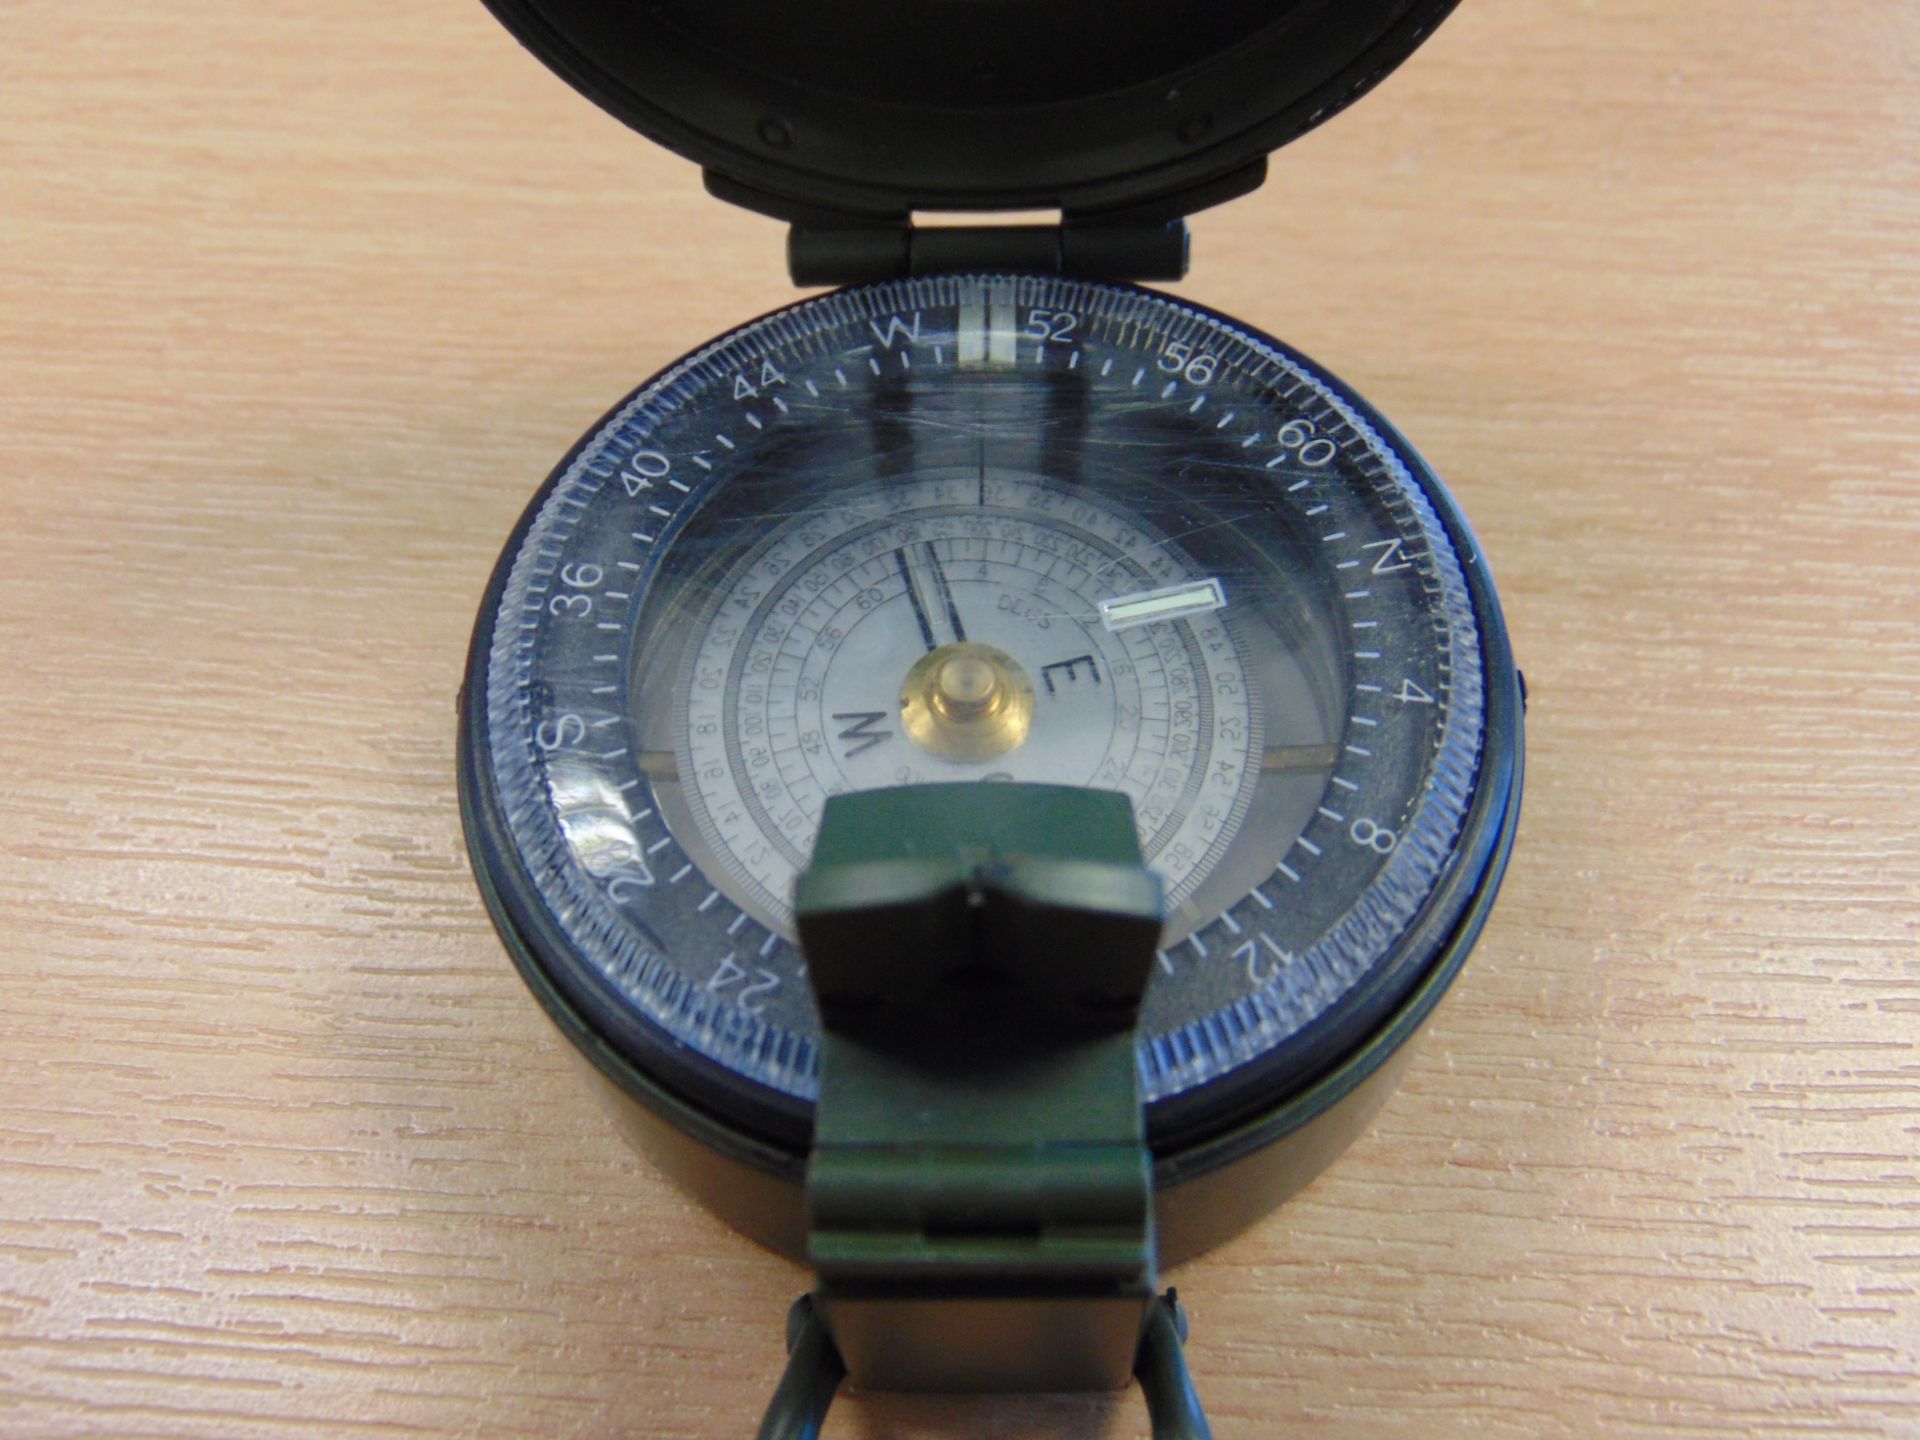 Francis barker British Army Prismatic Compass in Mils - Image 7 of 12